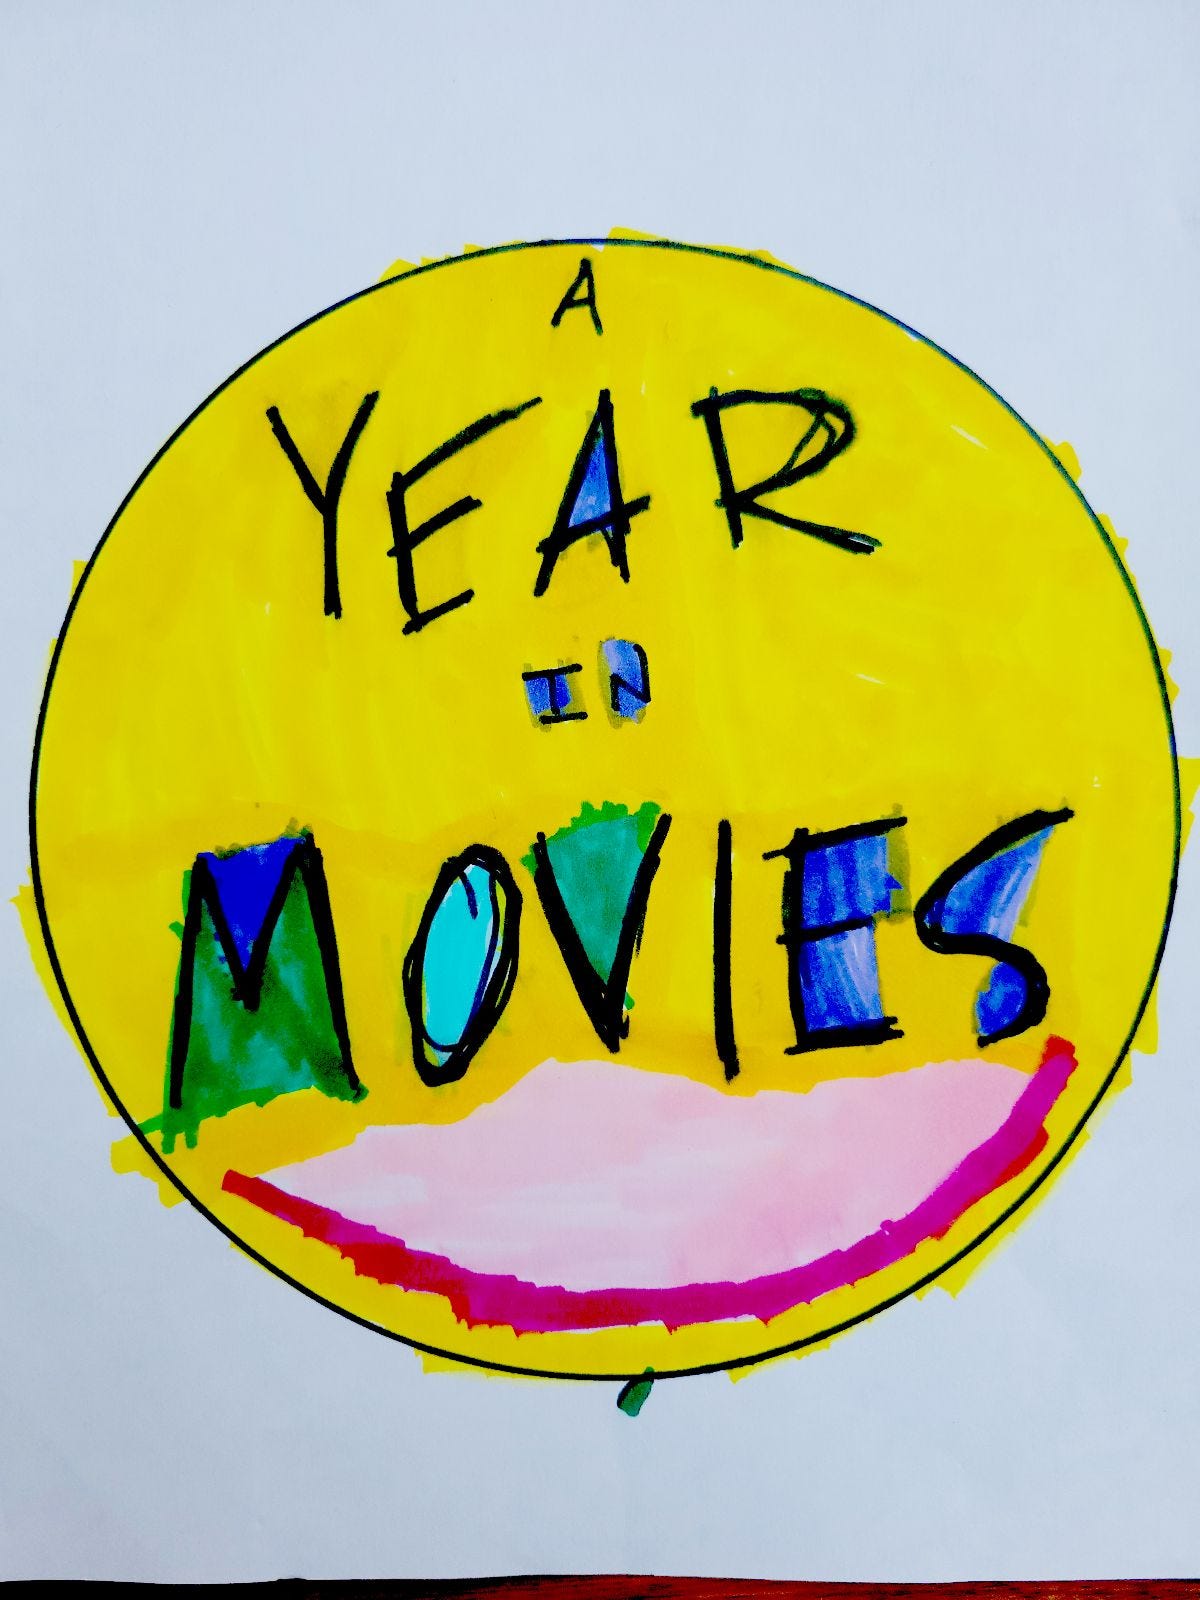 Artwork for A Year in Movies